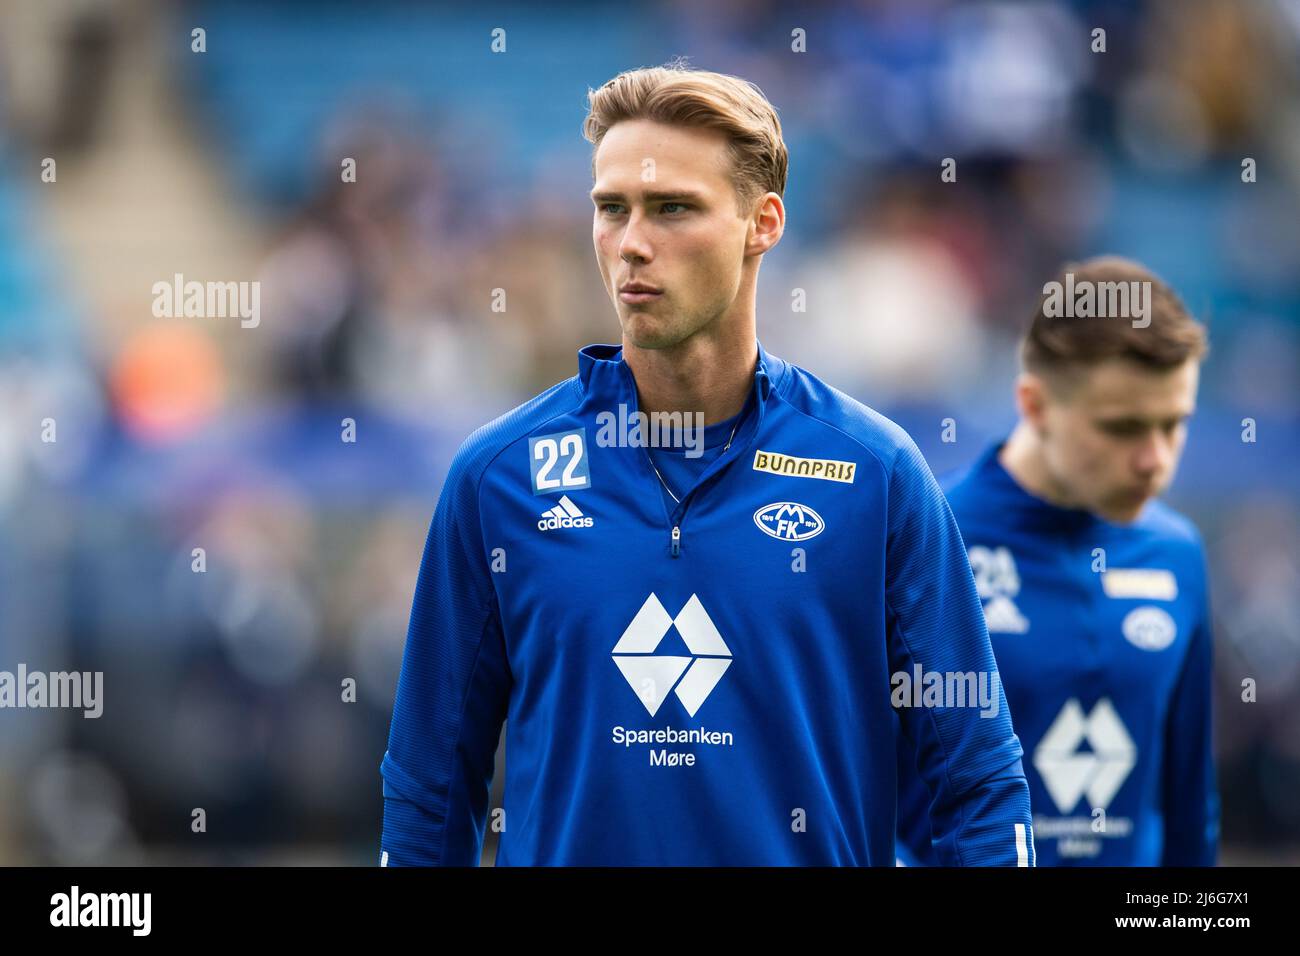 Oslo, Norway. 01st, May 2022. Magnus Retsius Groedem (22) of Molde is warming up before the Norwegian Cup final, the NM Menn final, between Bodoe/Glimt and Molde at Ullevaal Stadion in Oslo. (Photo credit: Gonzales Photo - Jan-Erik Eriksen). Credit: Gonzales Photo/Alamy Live News Stock Photo